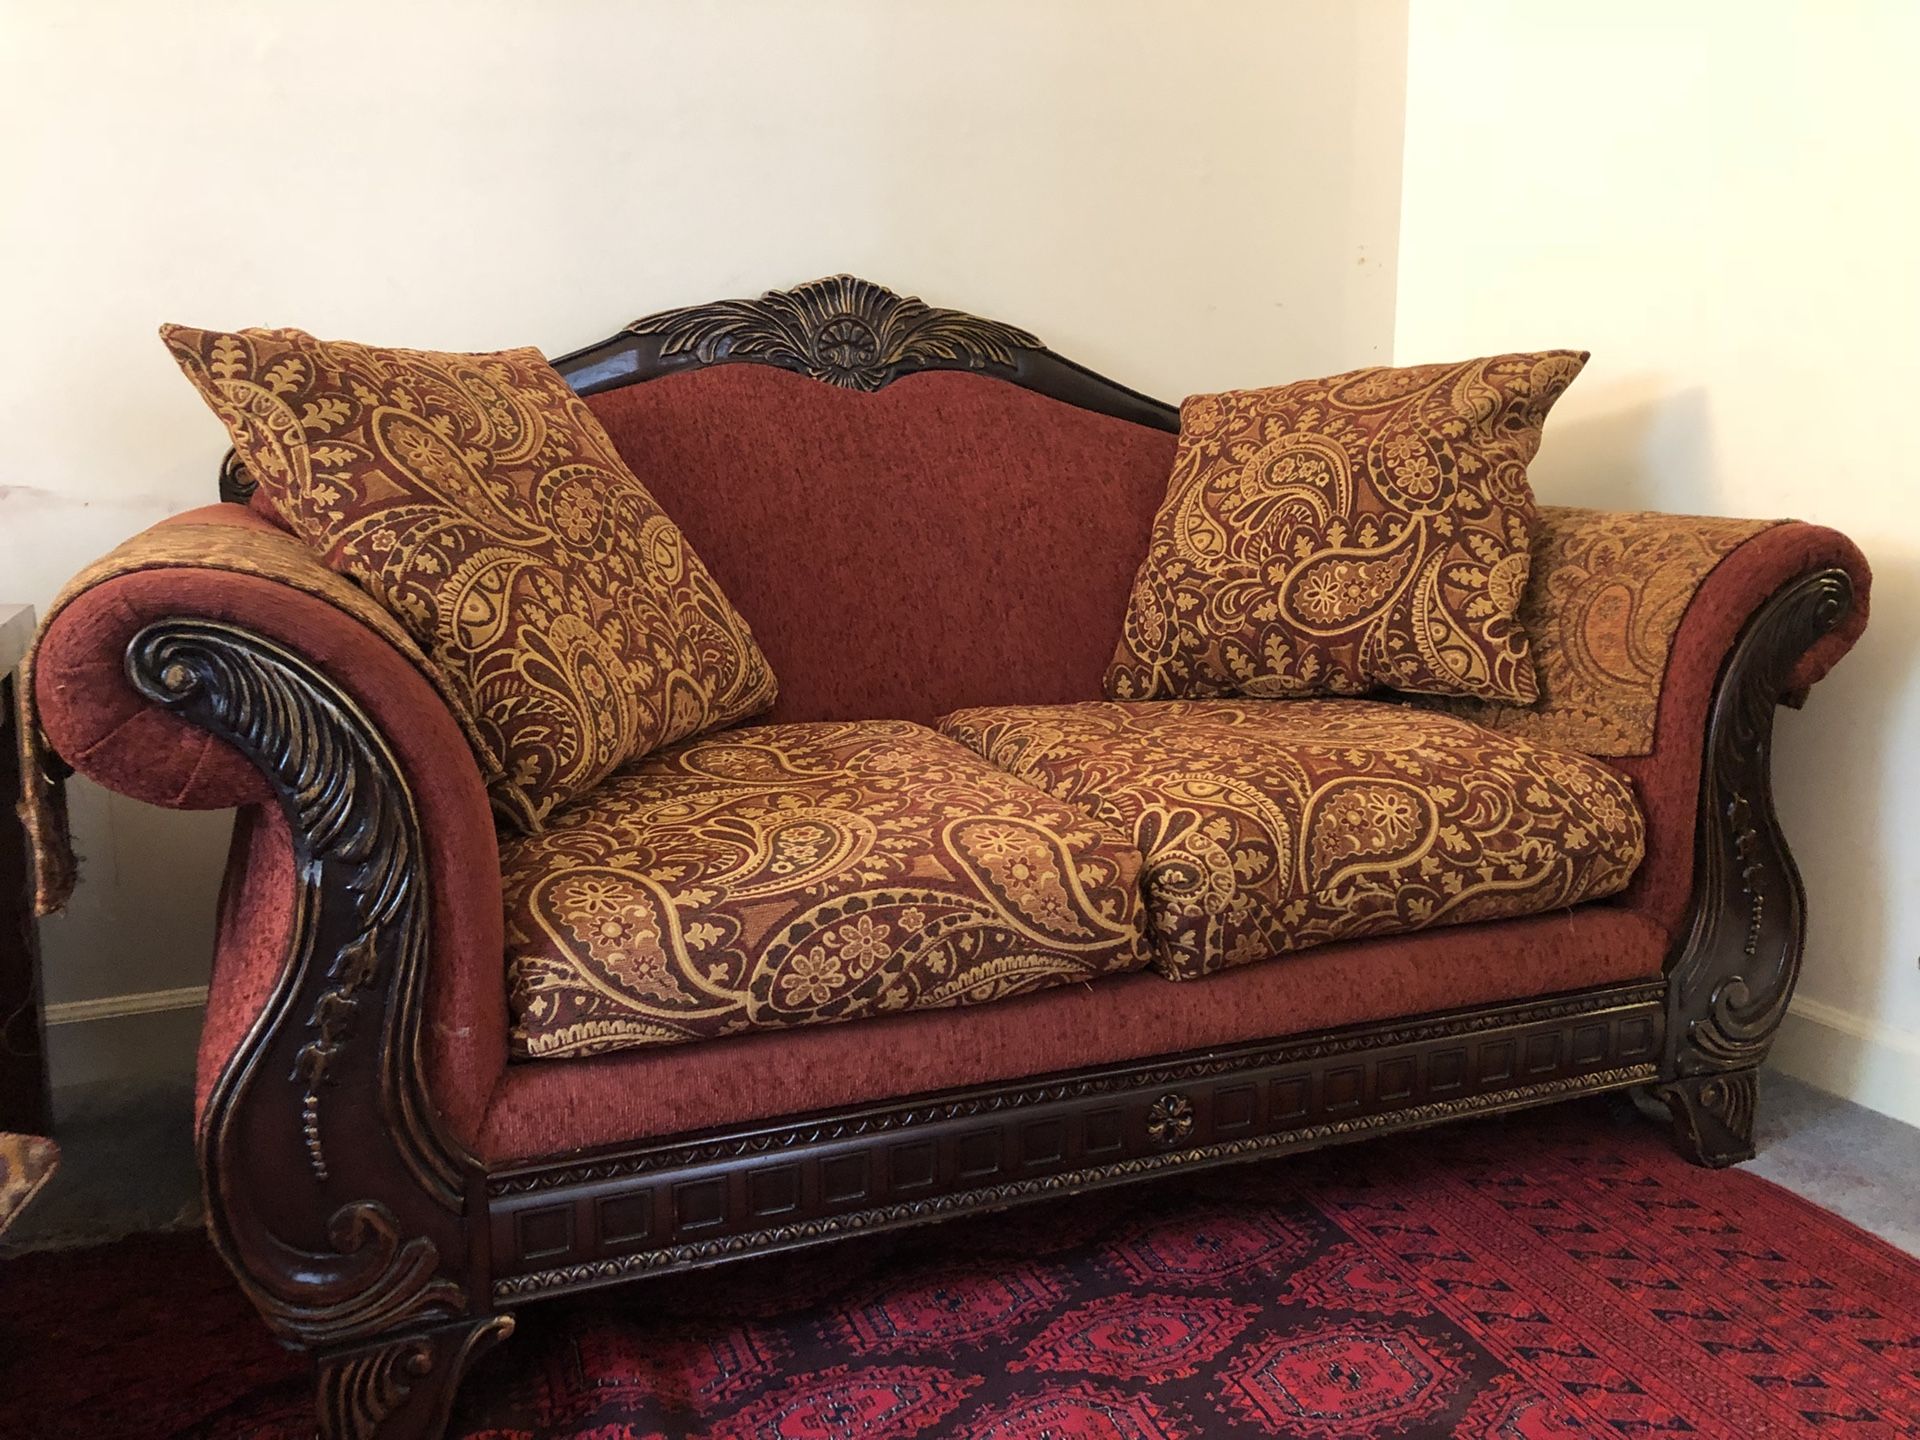 Brand new couch set. Couch, sofa, arm chair with beautiful design